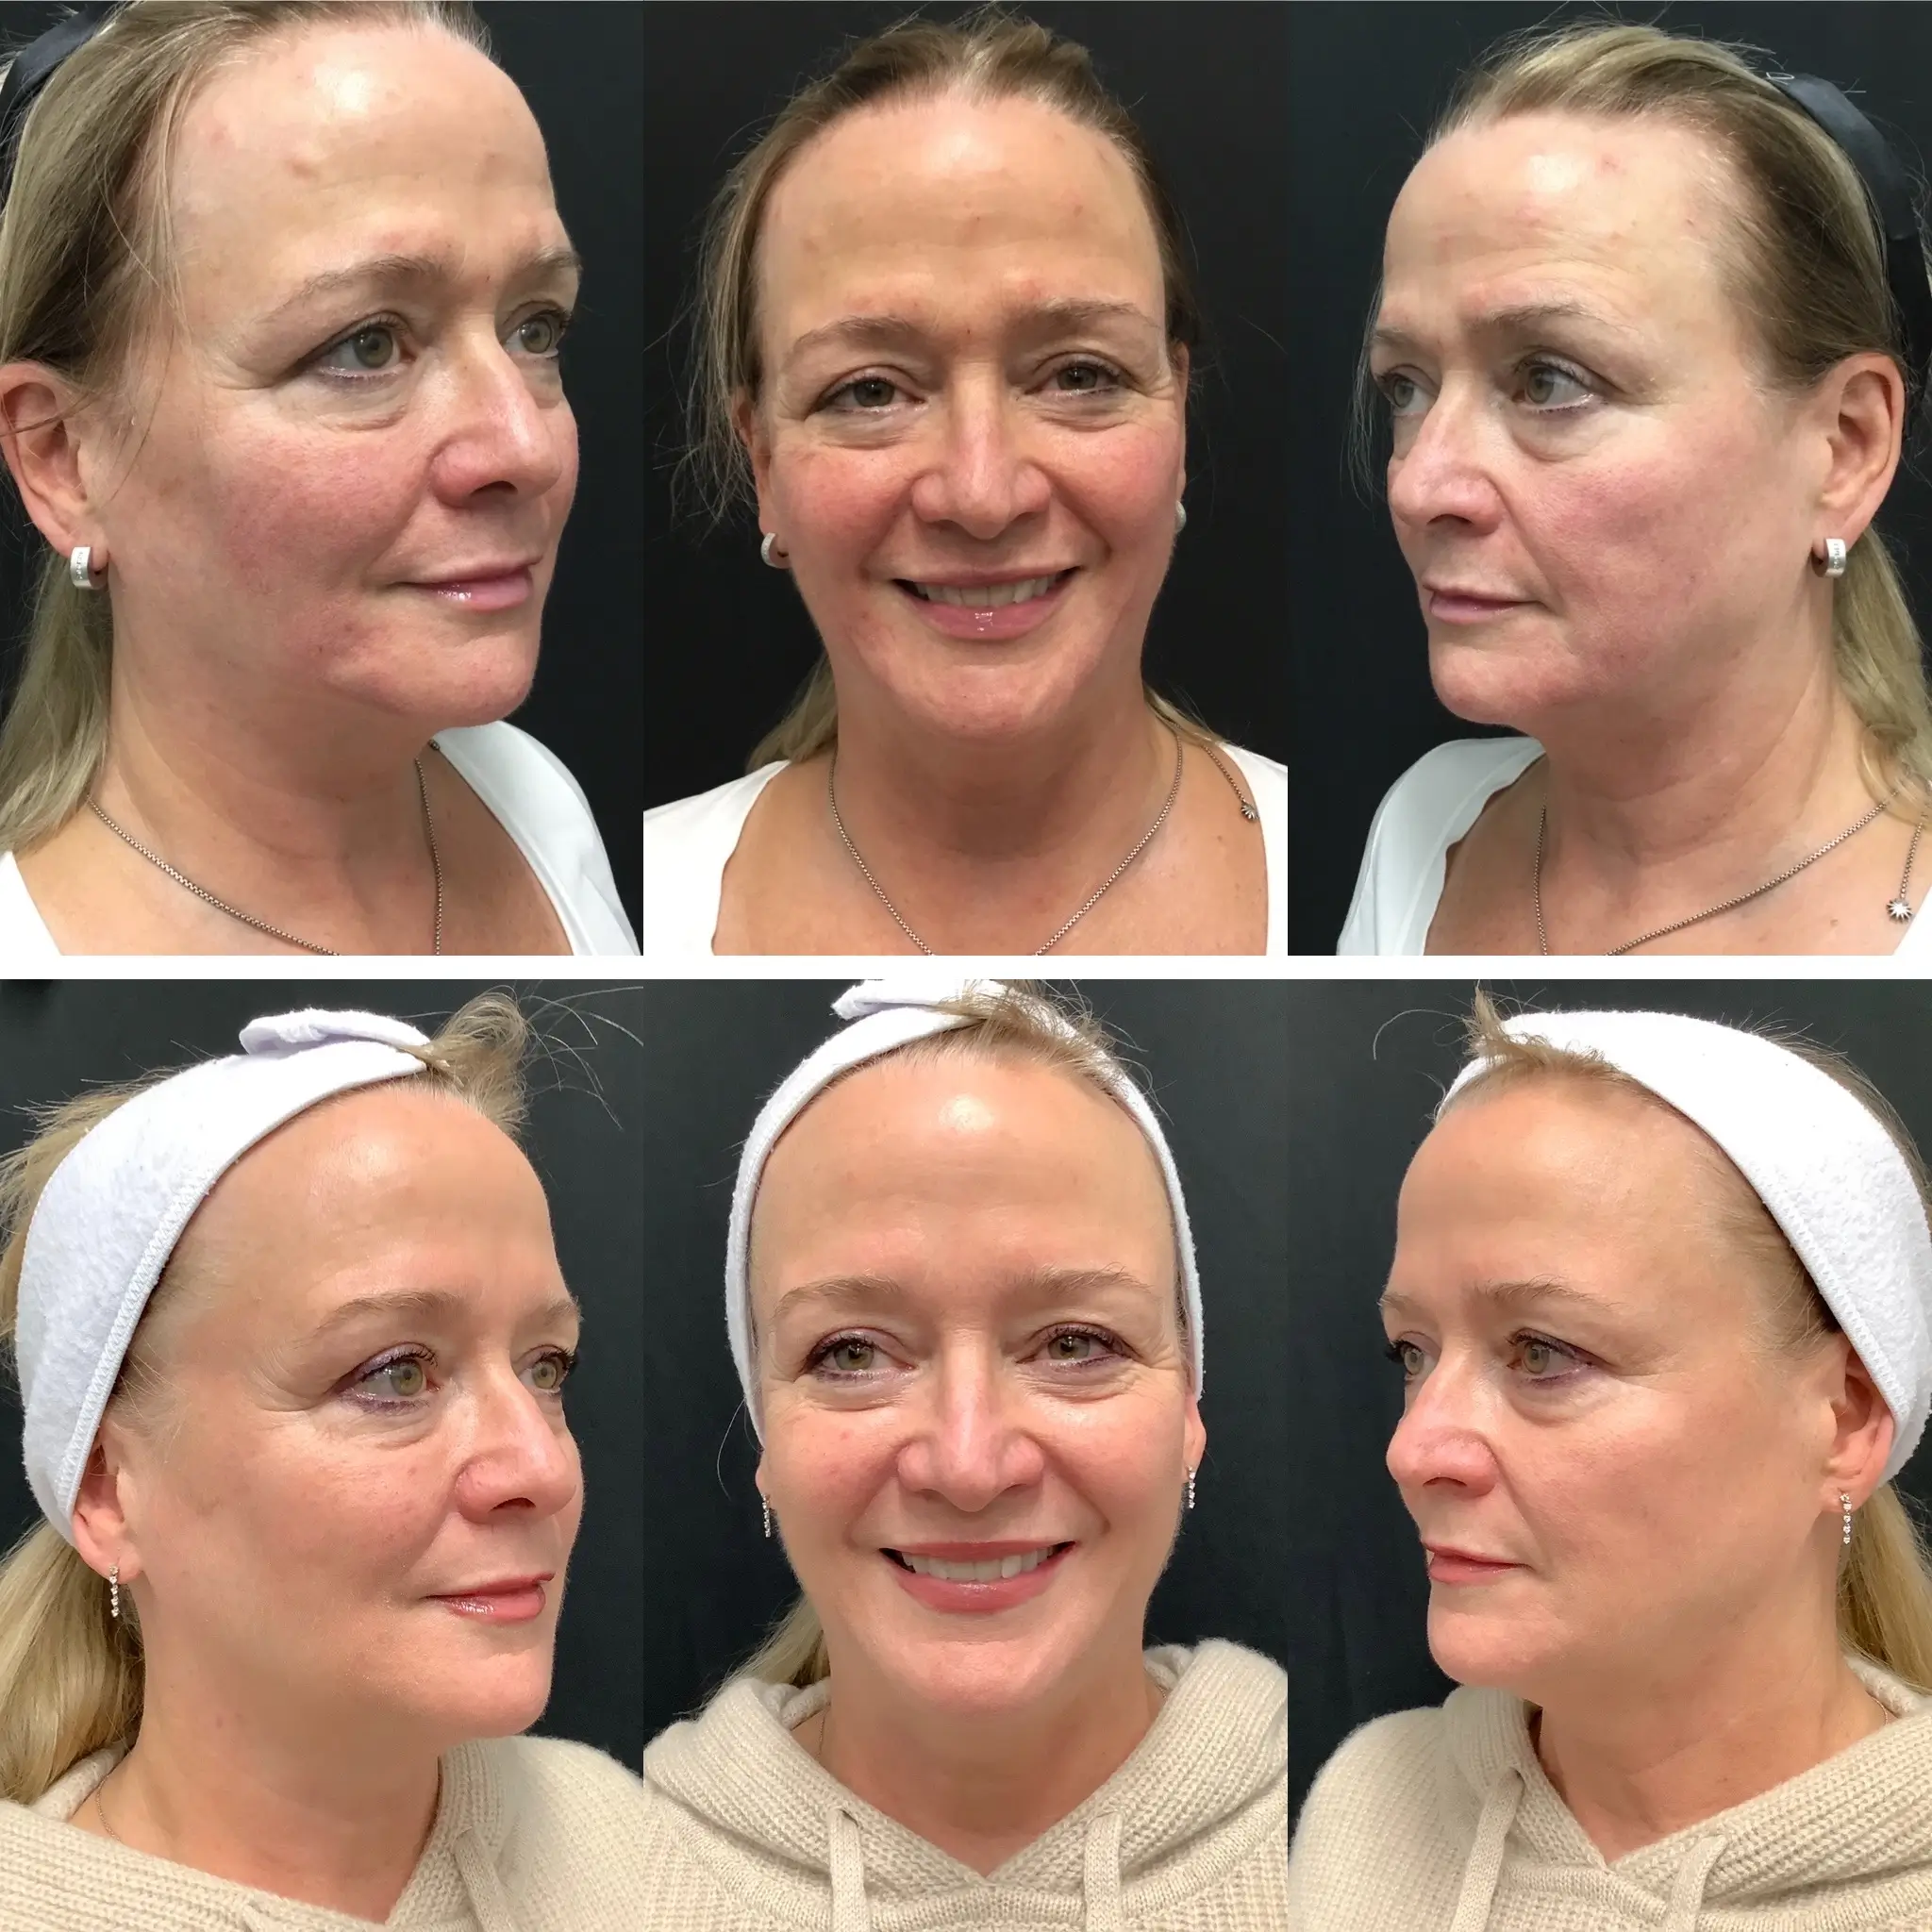 A collage featuring six photographs of a female patient from Morpheus Medical Spa in the Bay Area, showcasing significant improvement after receiving chemical peel treatment on her face.